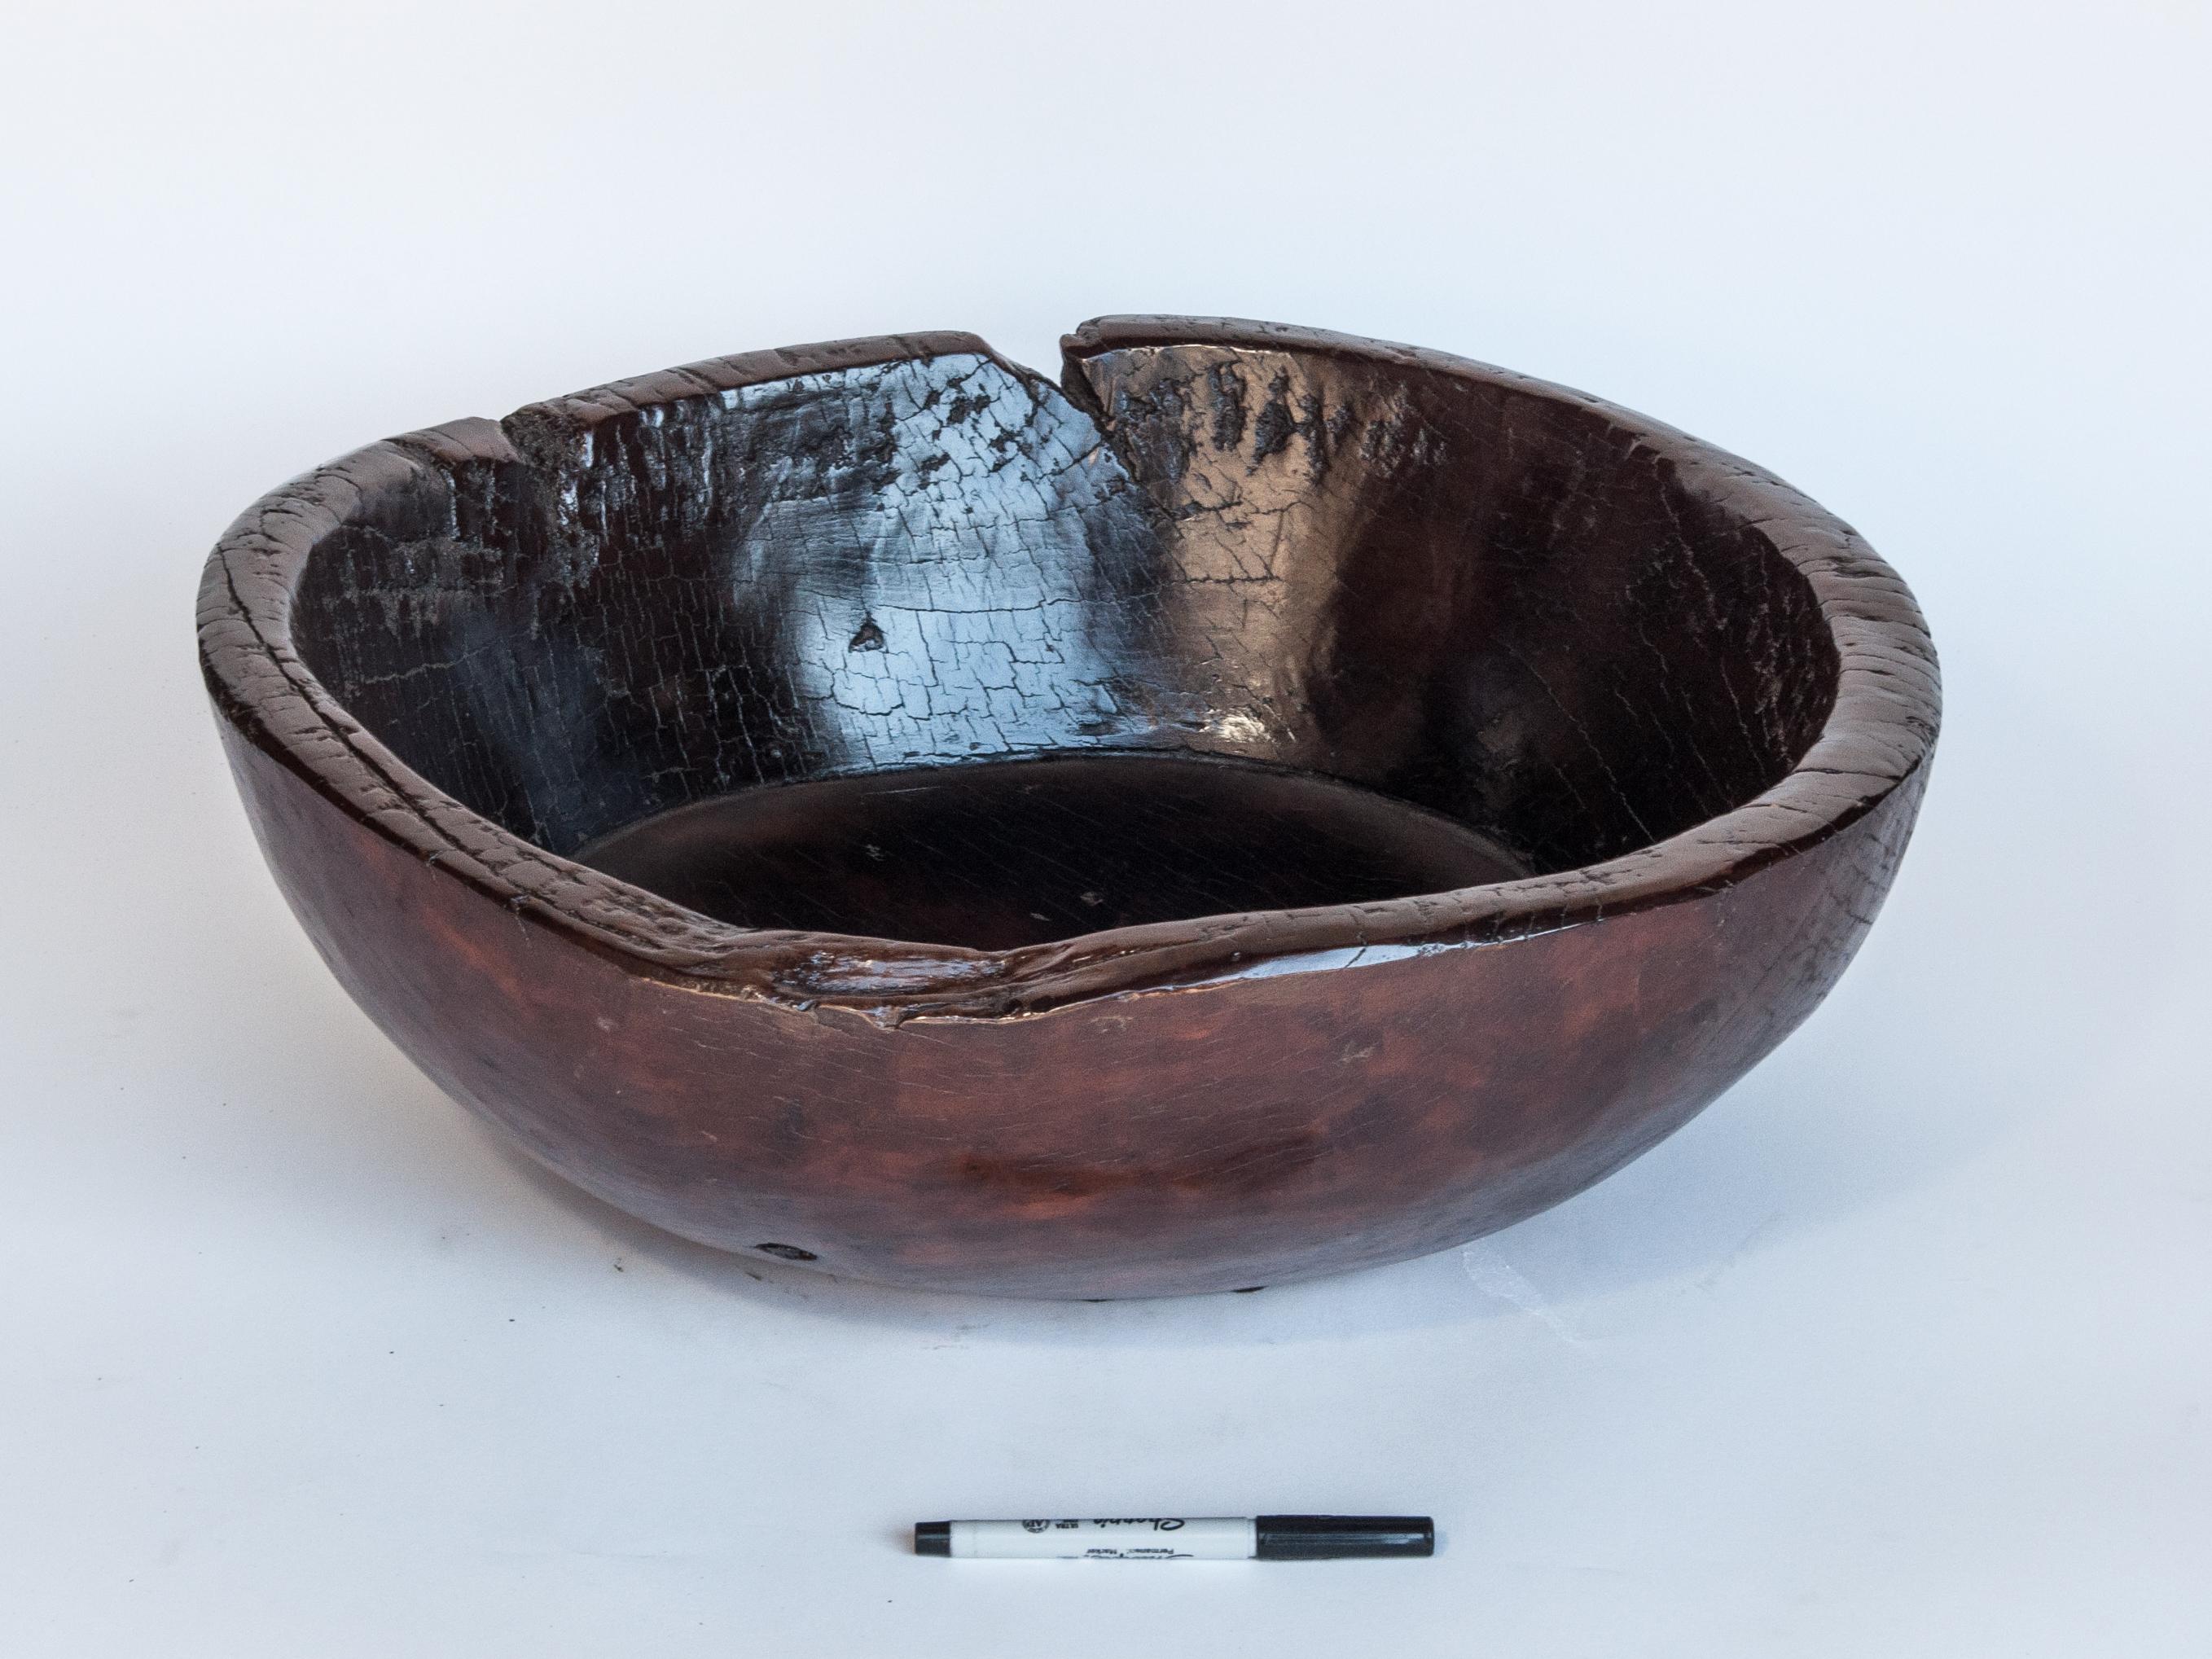 Old tribal wooden bowl from the Nepal Himal, mid-20th century. 20 inch diameter.
This bowl is hand hewn from a single piece of local hardwood. Years of use in the smokey interior of a Nepali house lend it a rich patina.
Condition: Structurally the